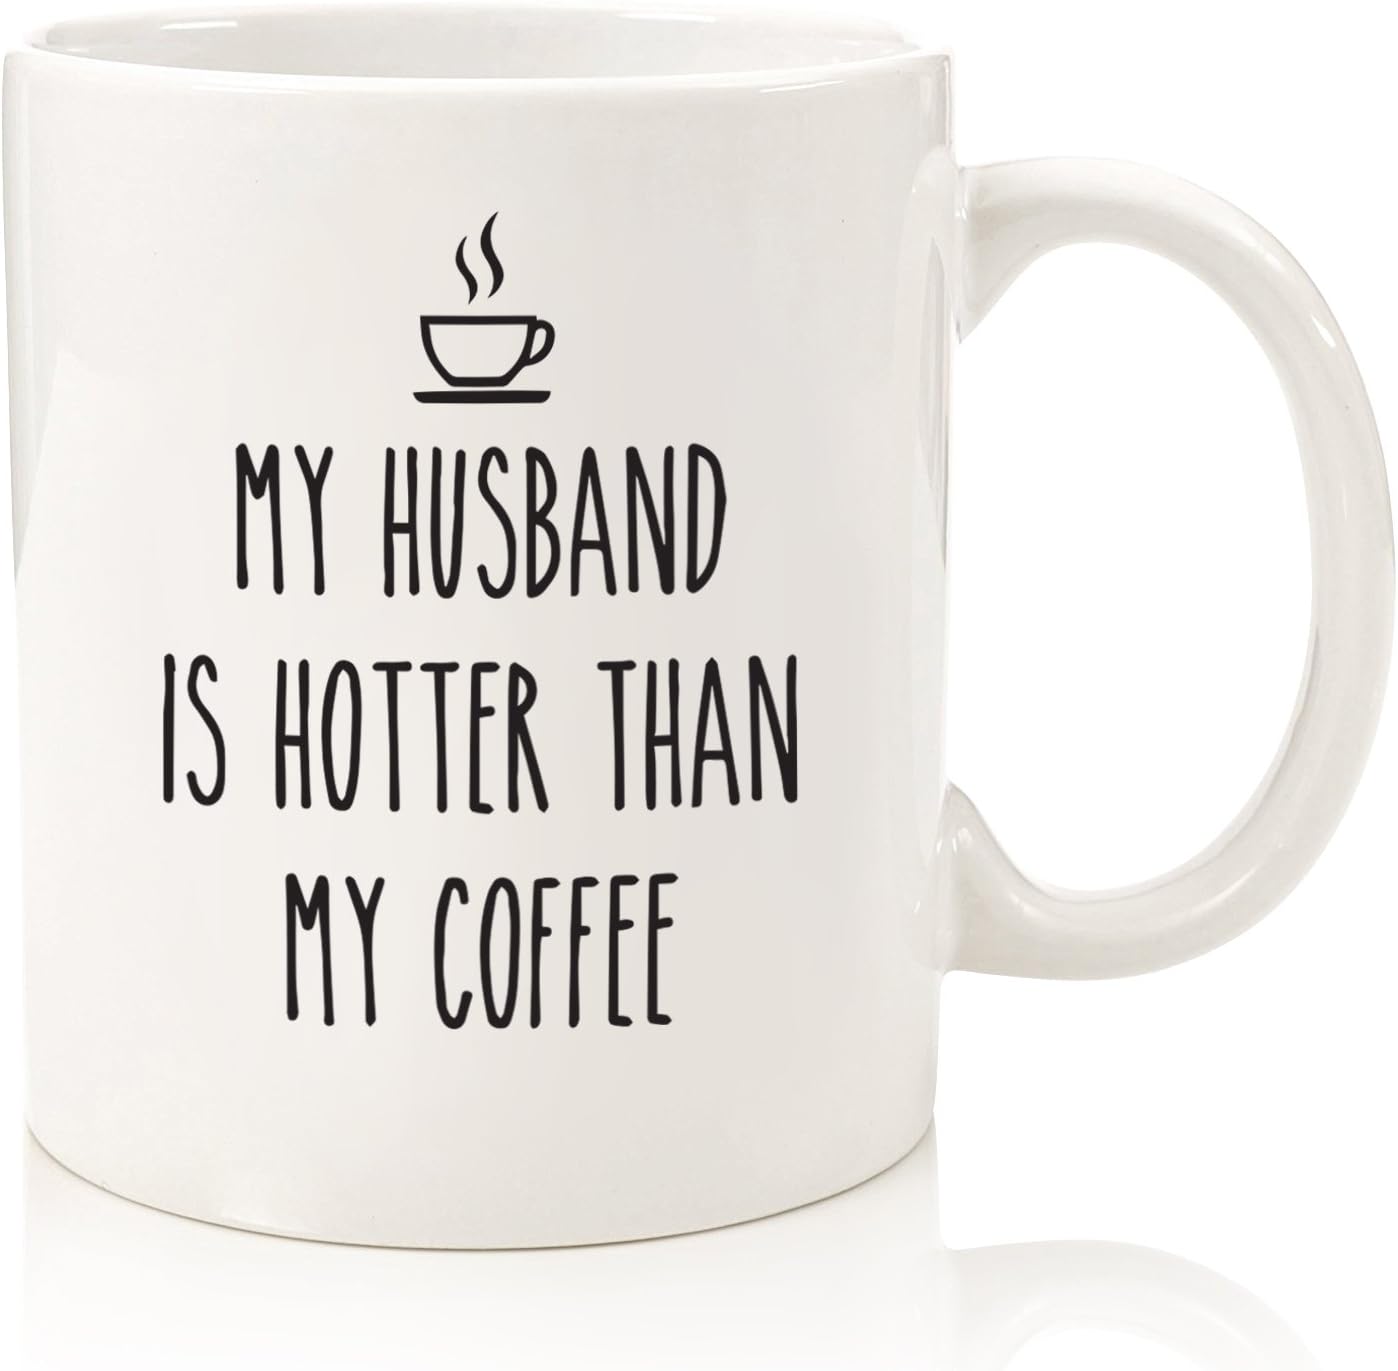 My Husband Is Hotter Than My Coffee - Funny Gift for Husband Coffee Cup - 11oz or 15oz Mug